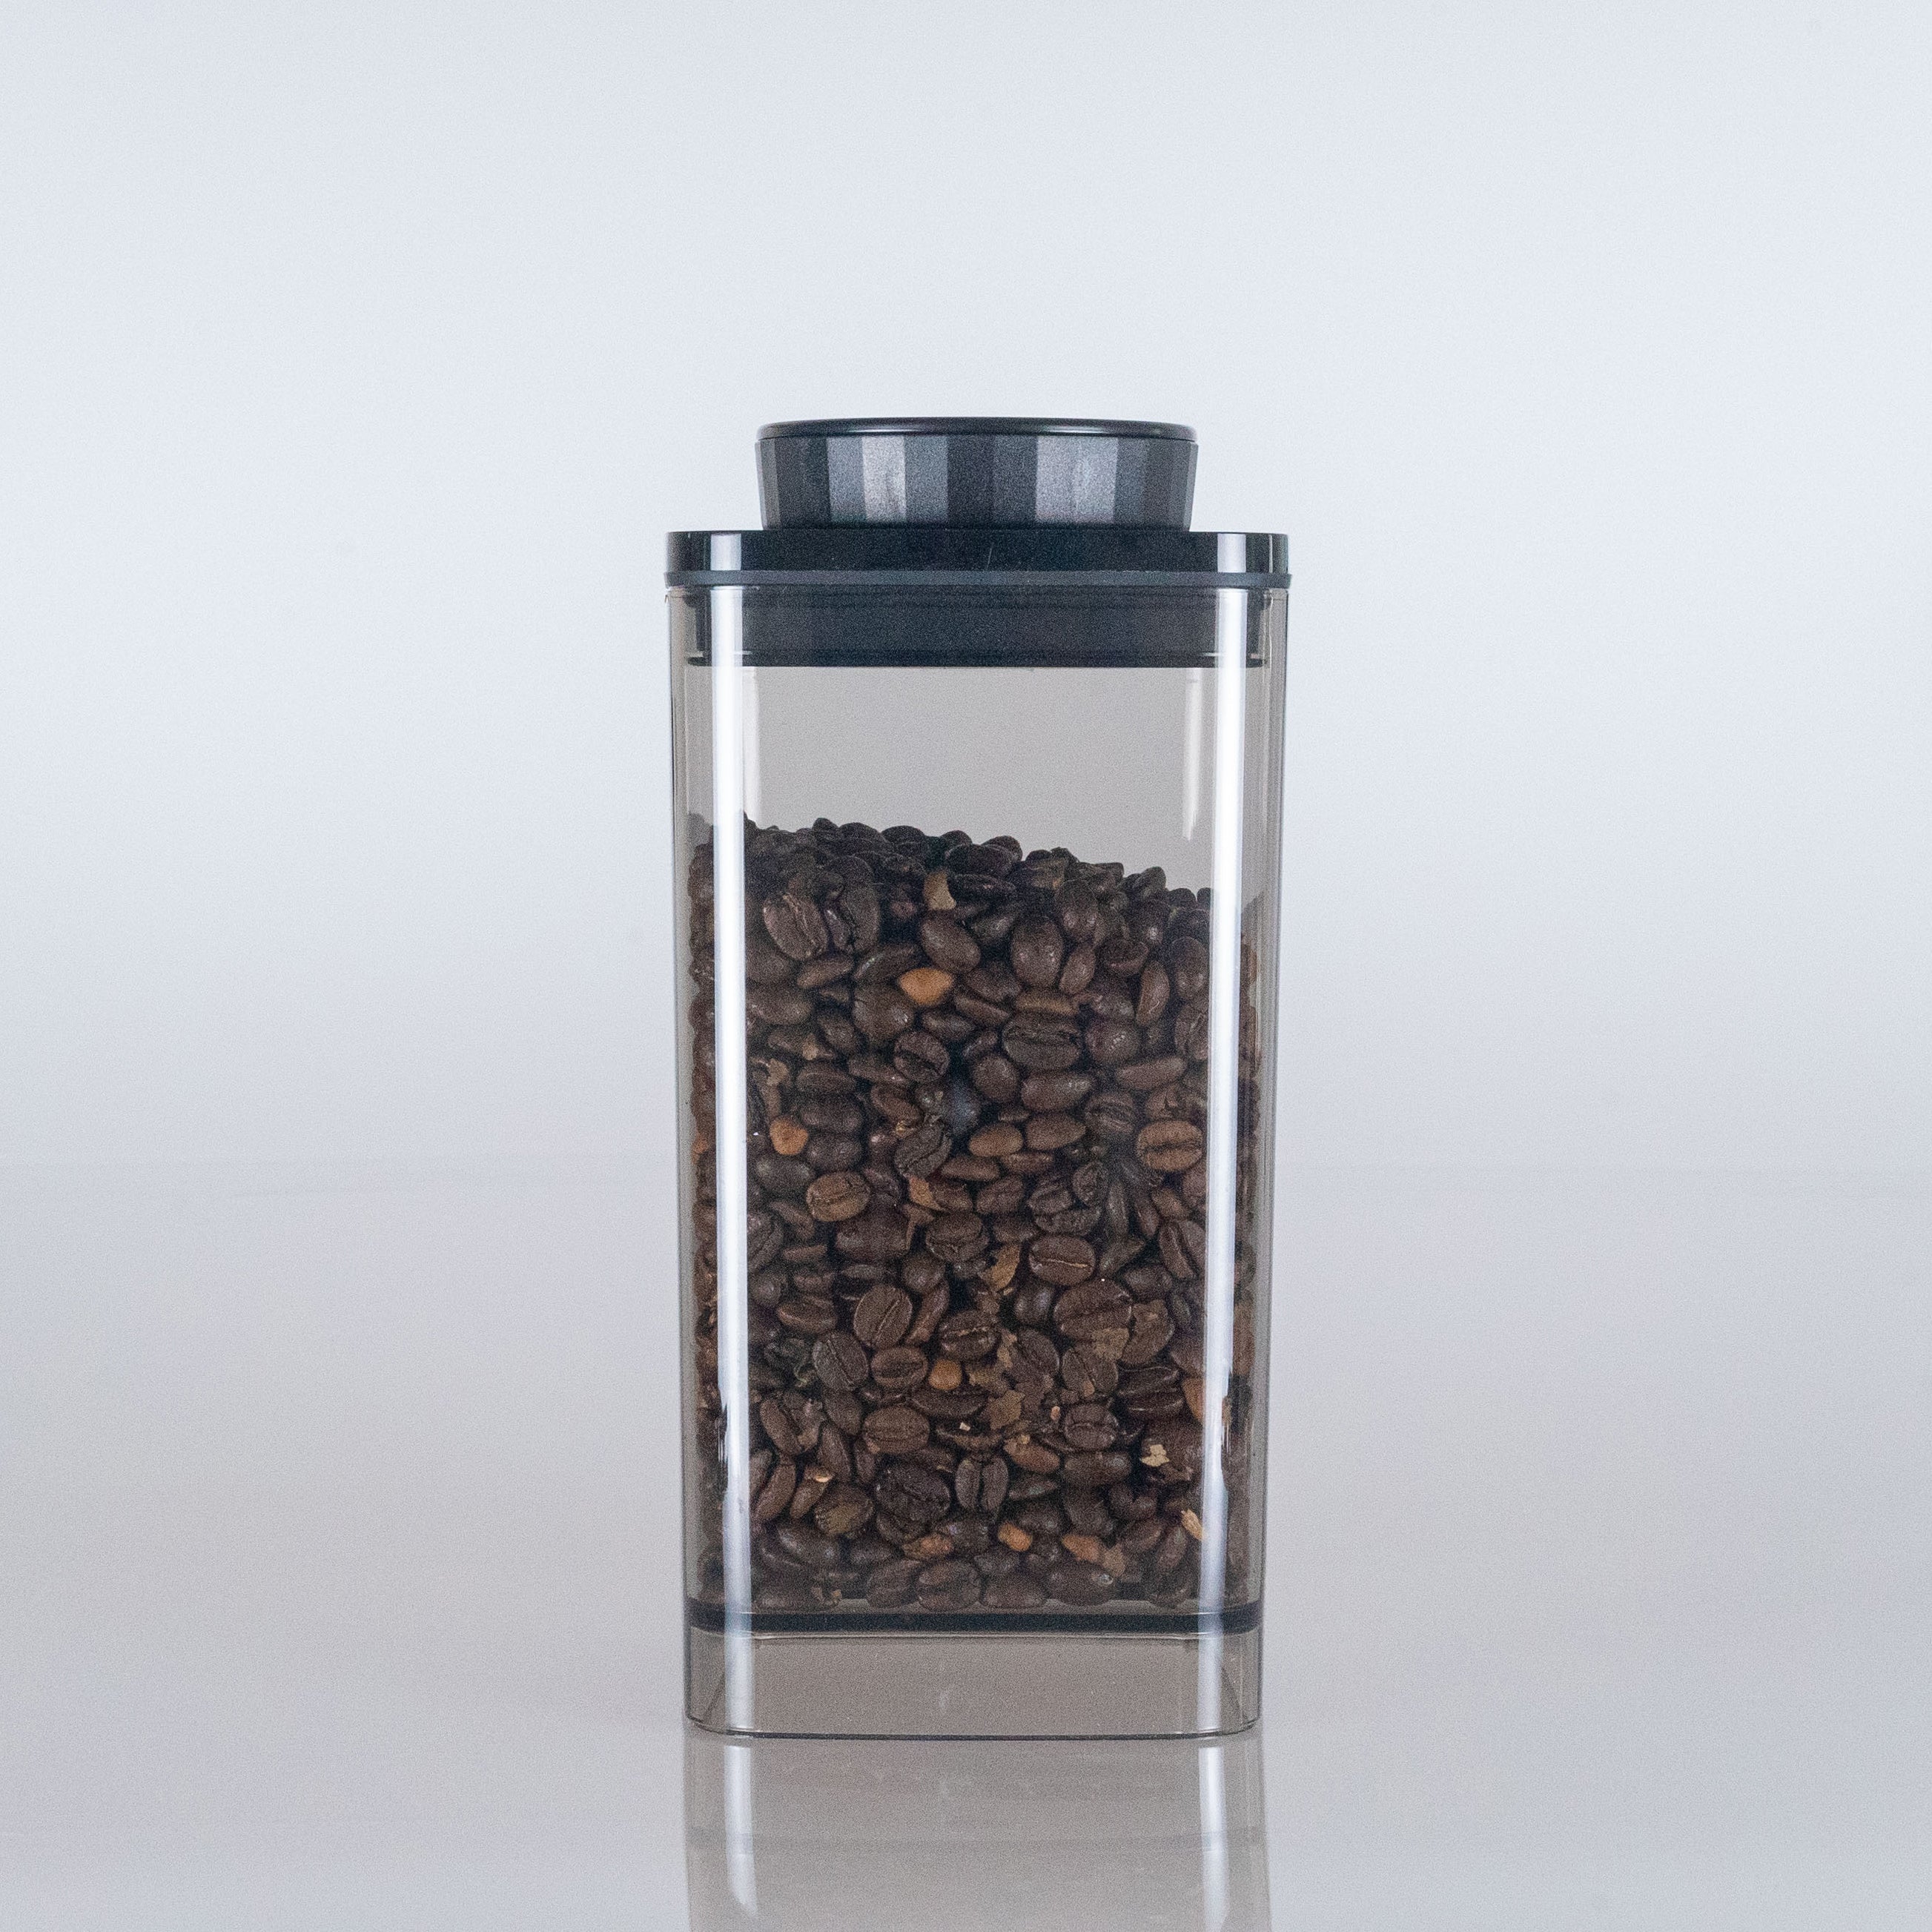 Hermetically-Sealing Coffee Canisters (1 lb. or 2.2 lb. Capacity)